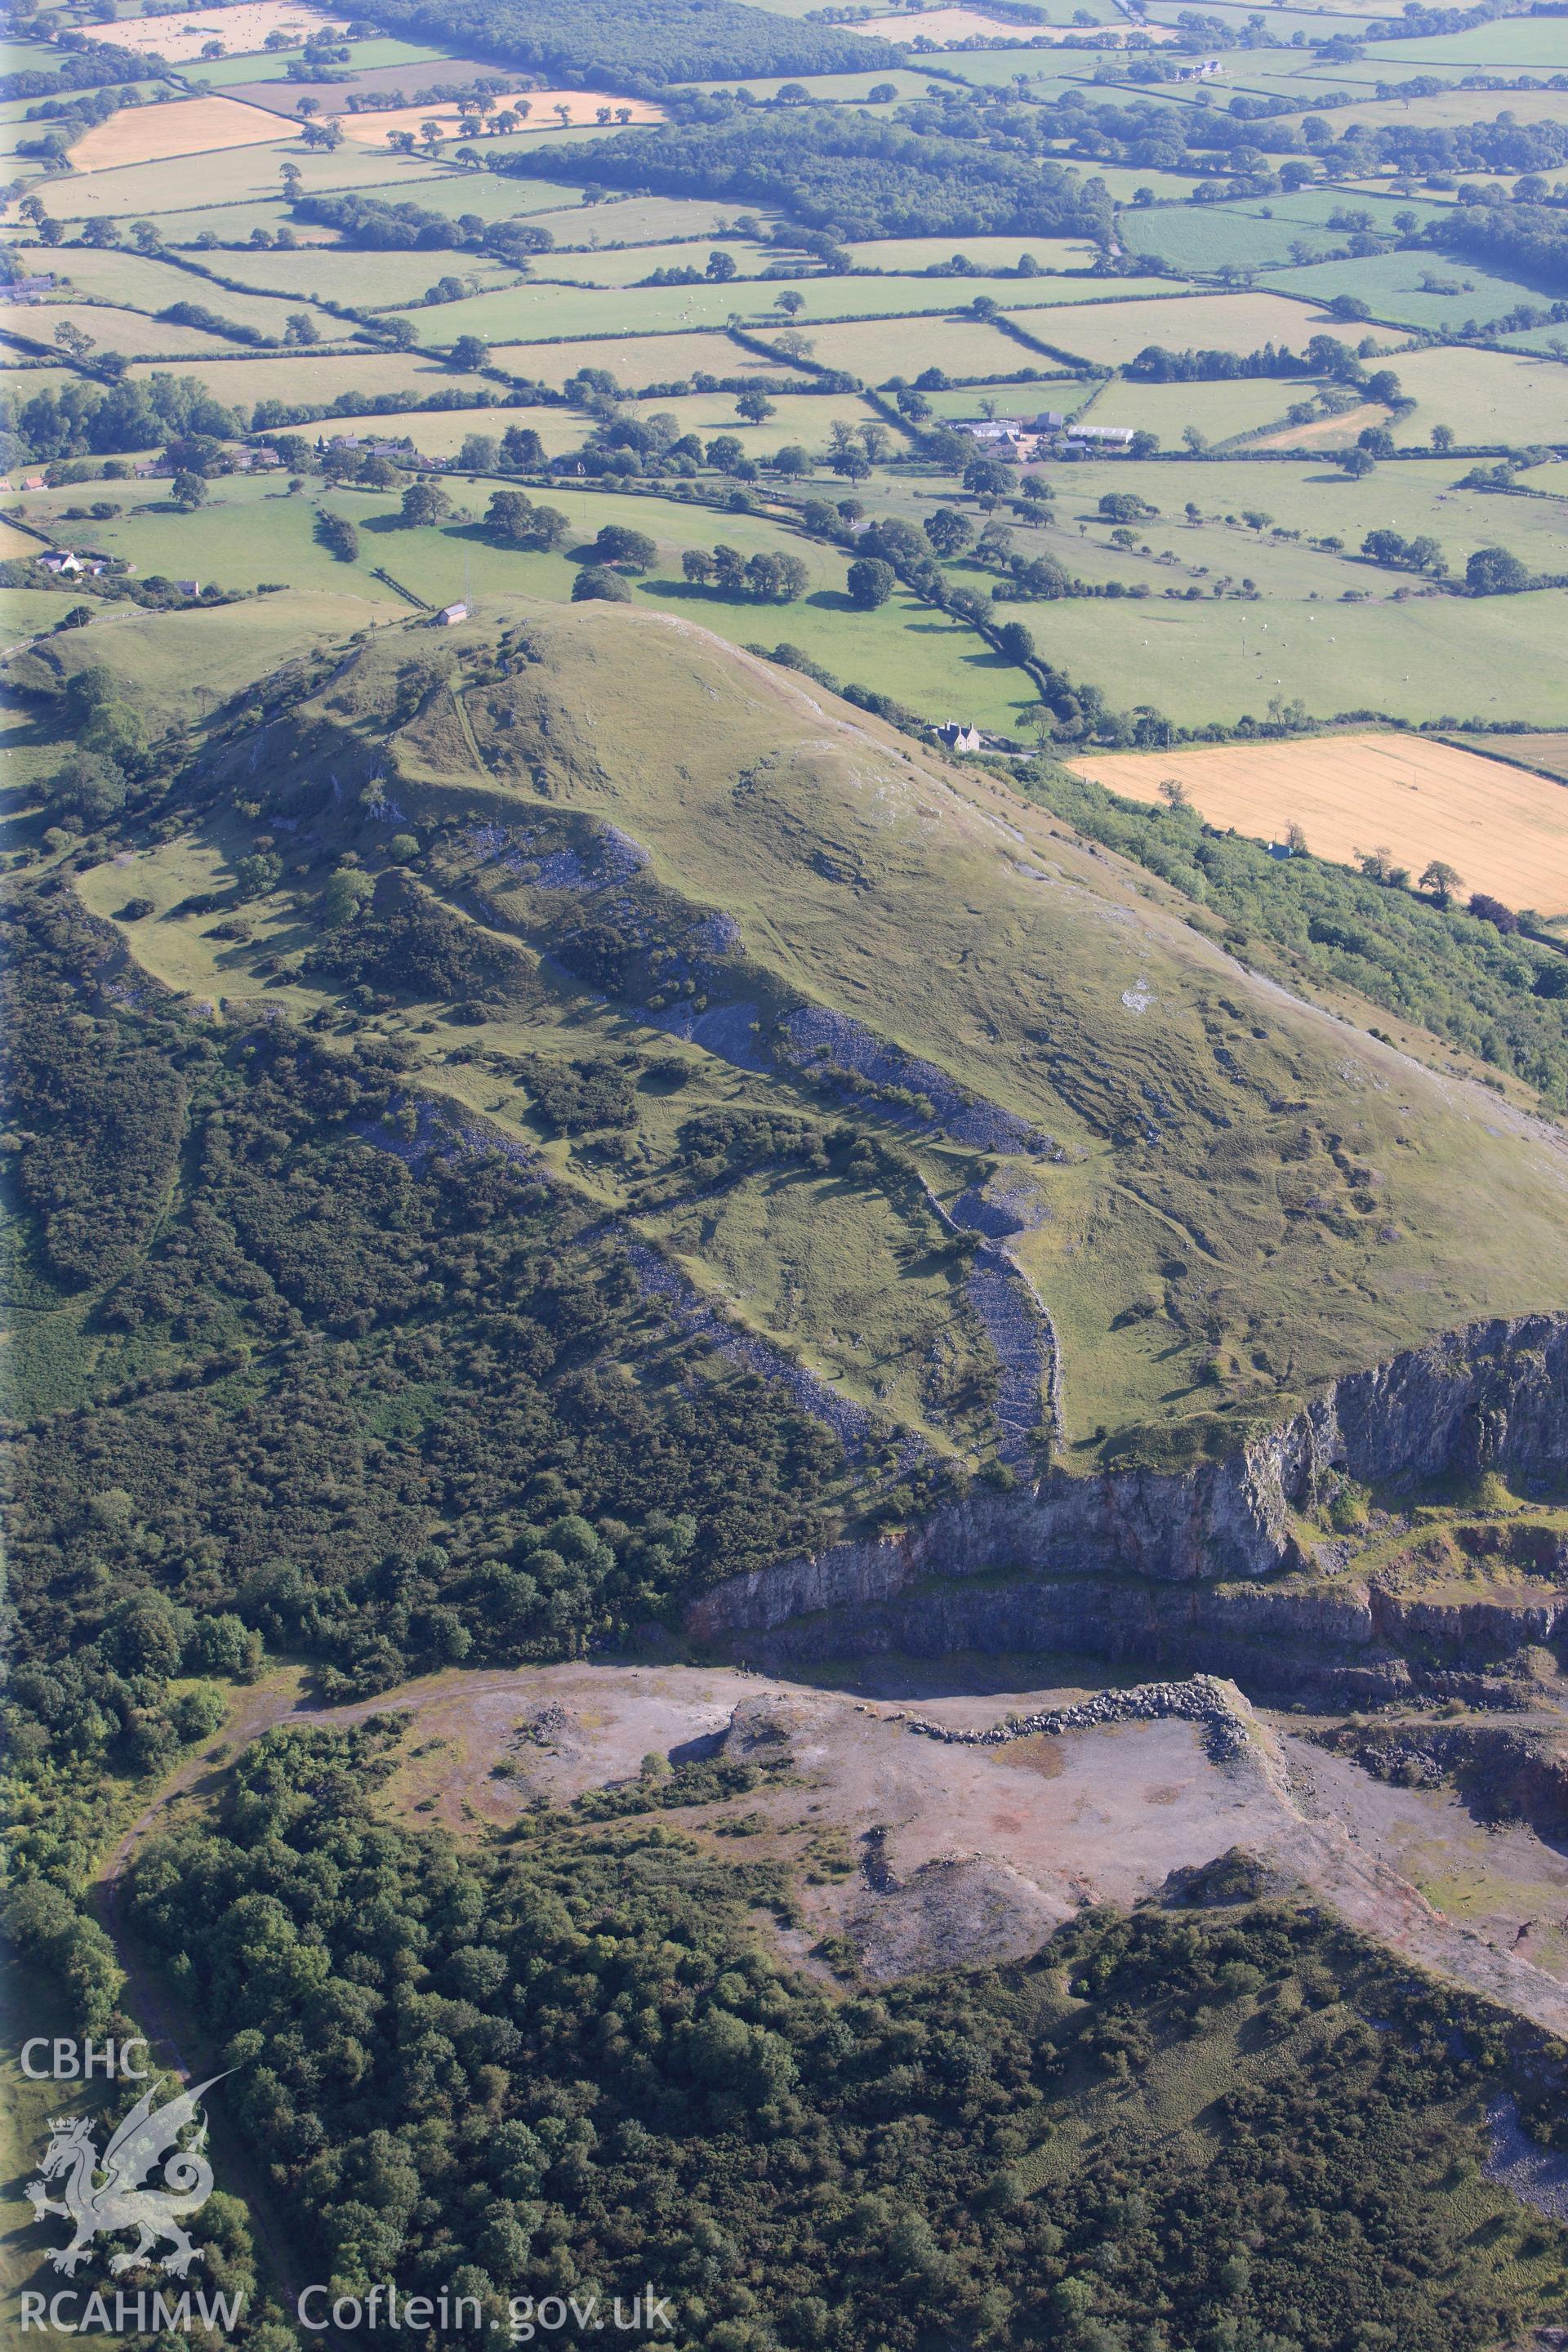 RCAHMW colour oblique photograph of Moel Hiraddug. Taken by Toby Driver and Oliver Davies on 27/07/2011.